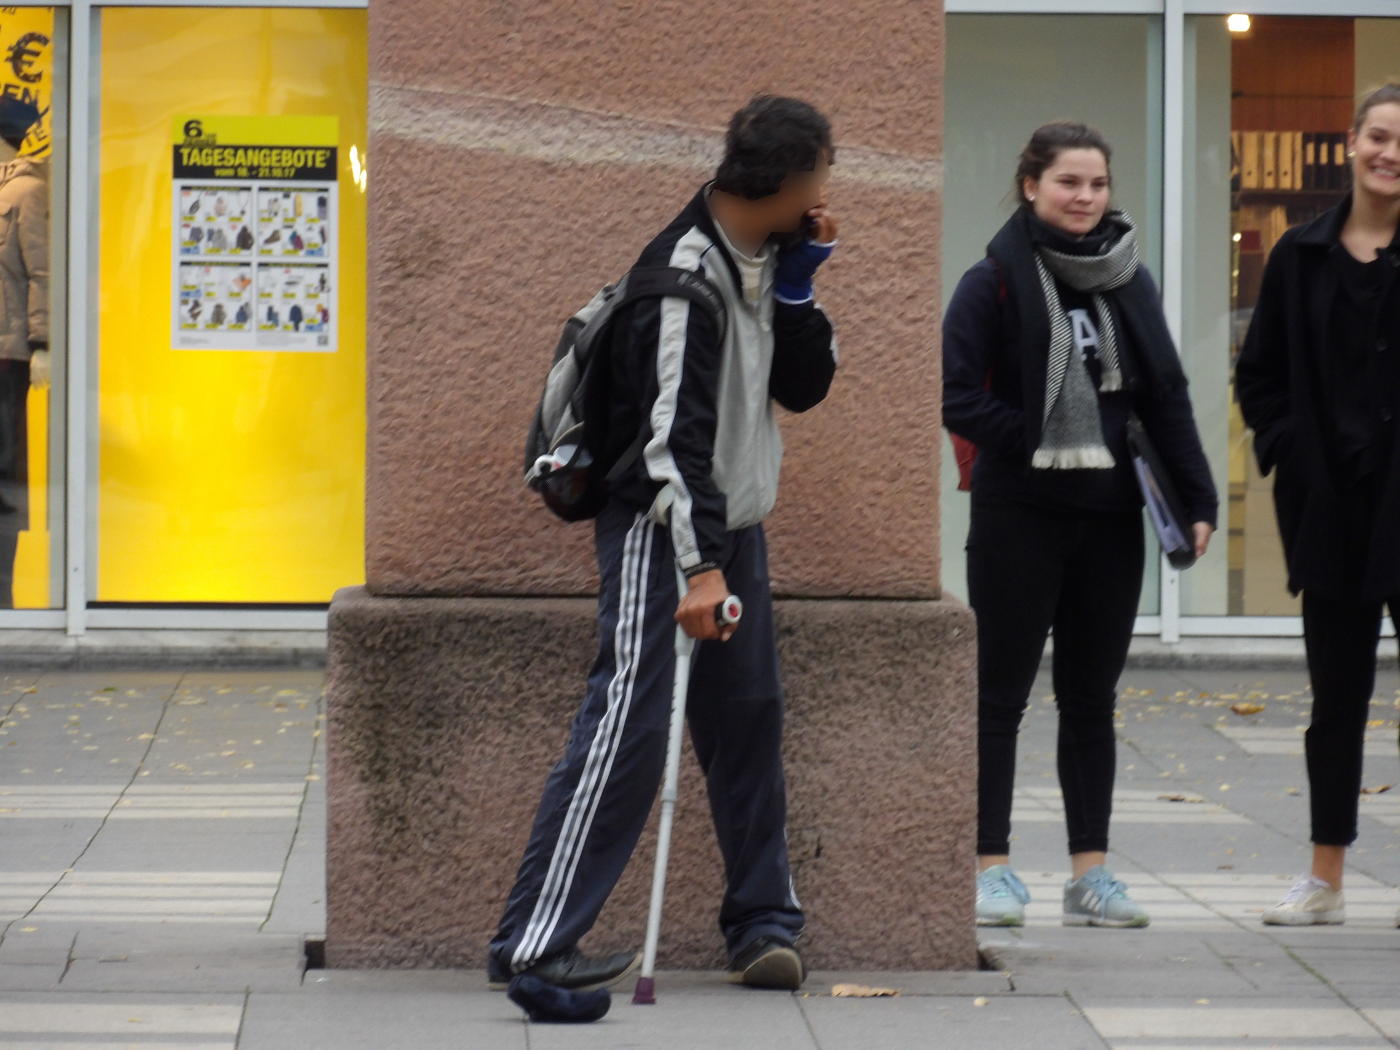 Heidelberg: A Professional Beggar and a Jehovah's Witness